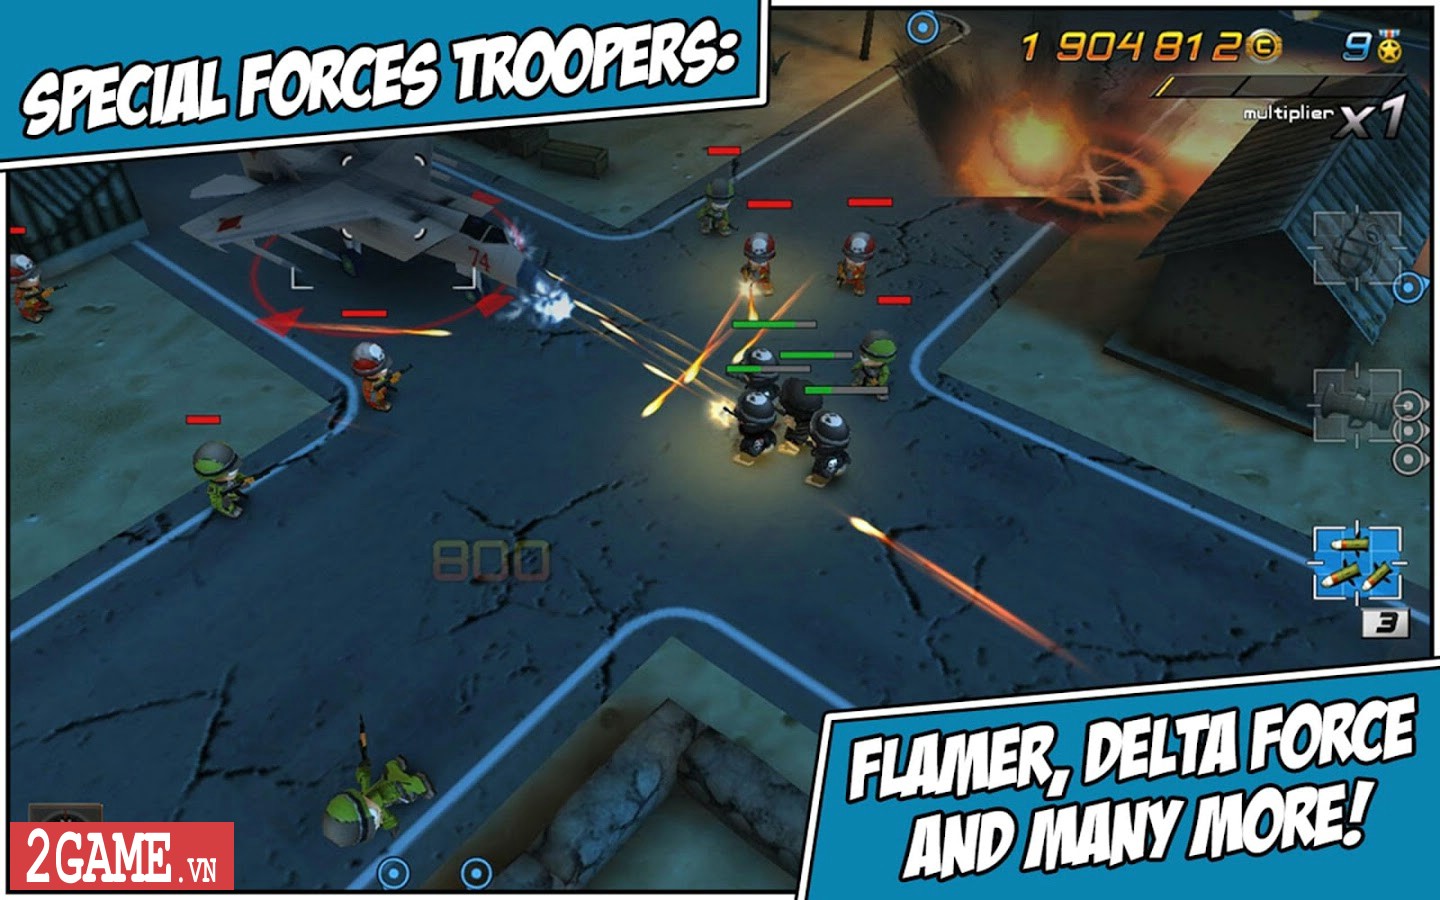 2game-Tiny-Troopers-2-mobile-5s.jpg (1440×900)